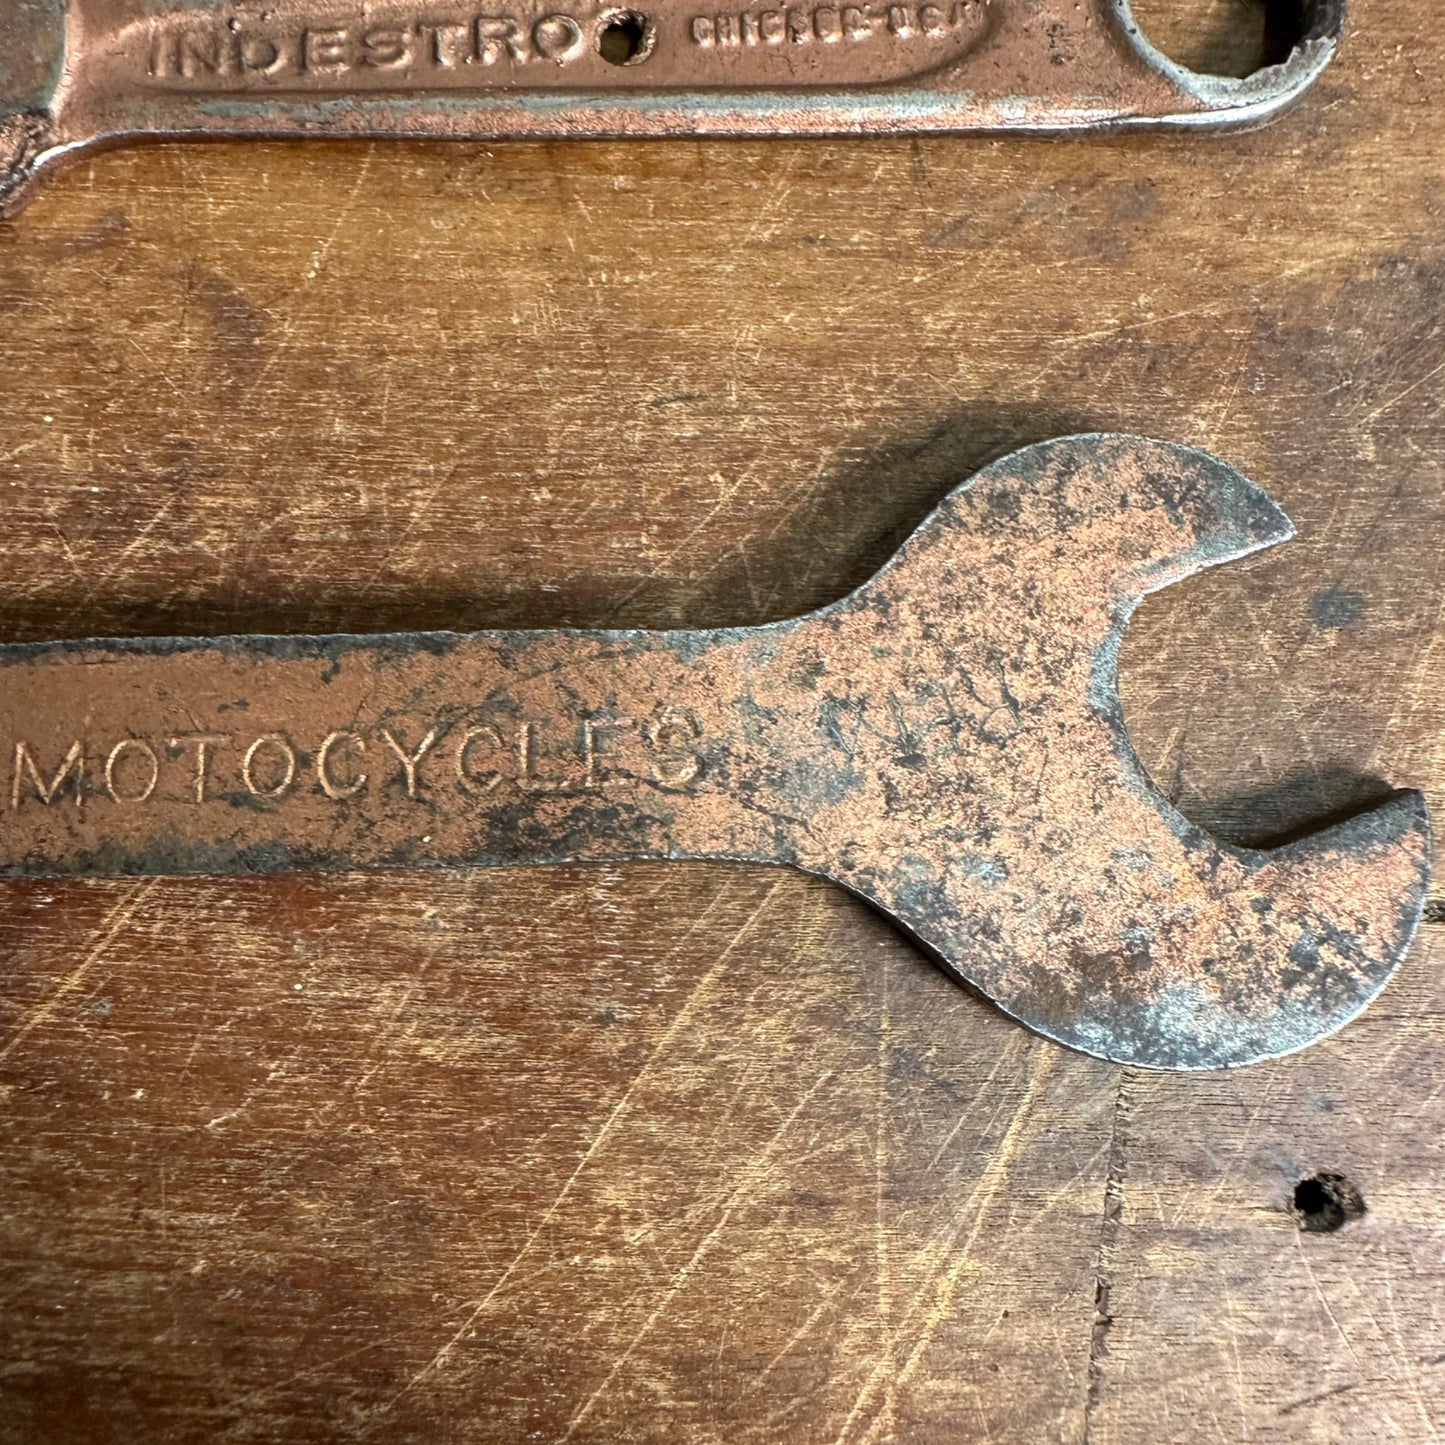 VINTAGE INDIAN MOTOCYCLES OPEN END MOTORCYCLE WRENCH W/ (2) INDESTRO